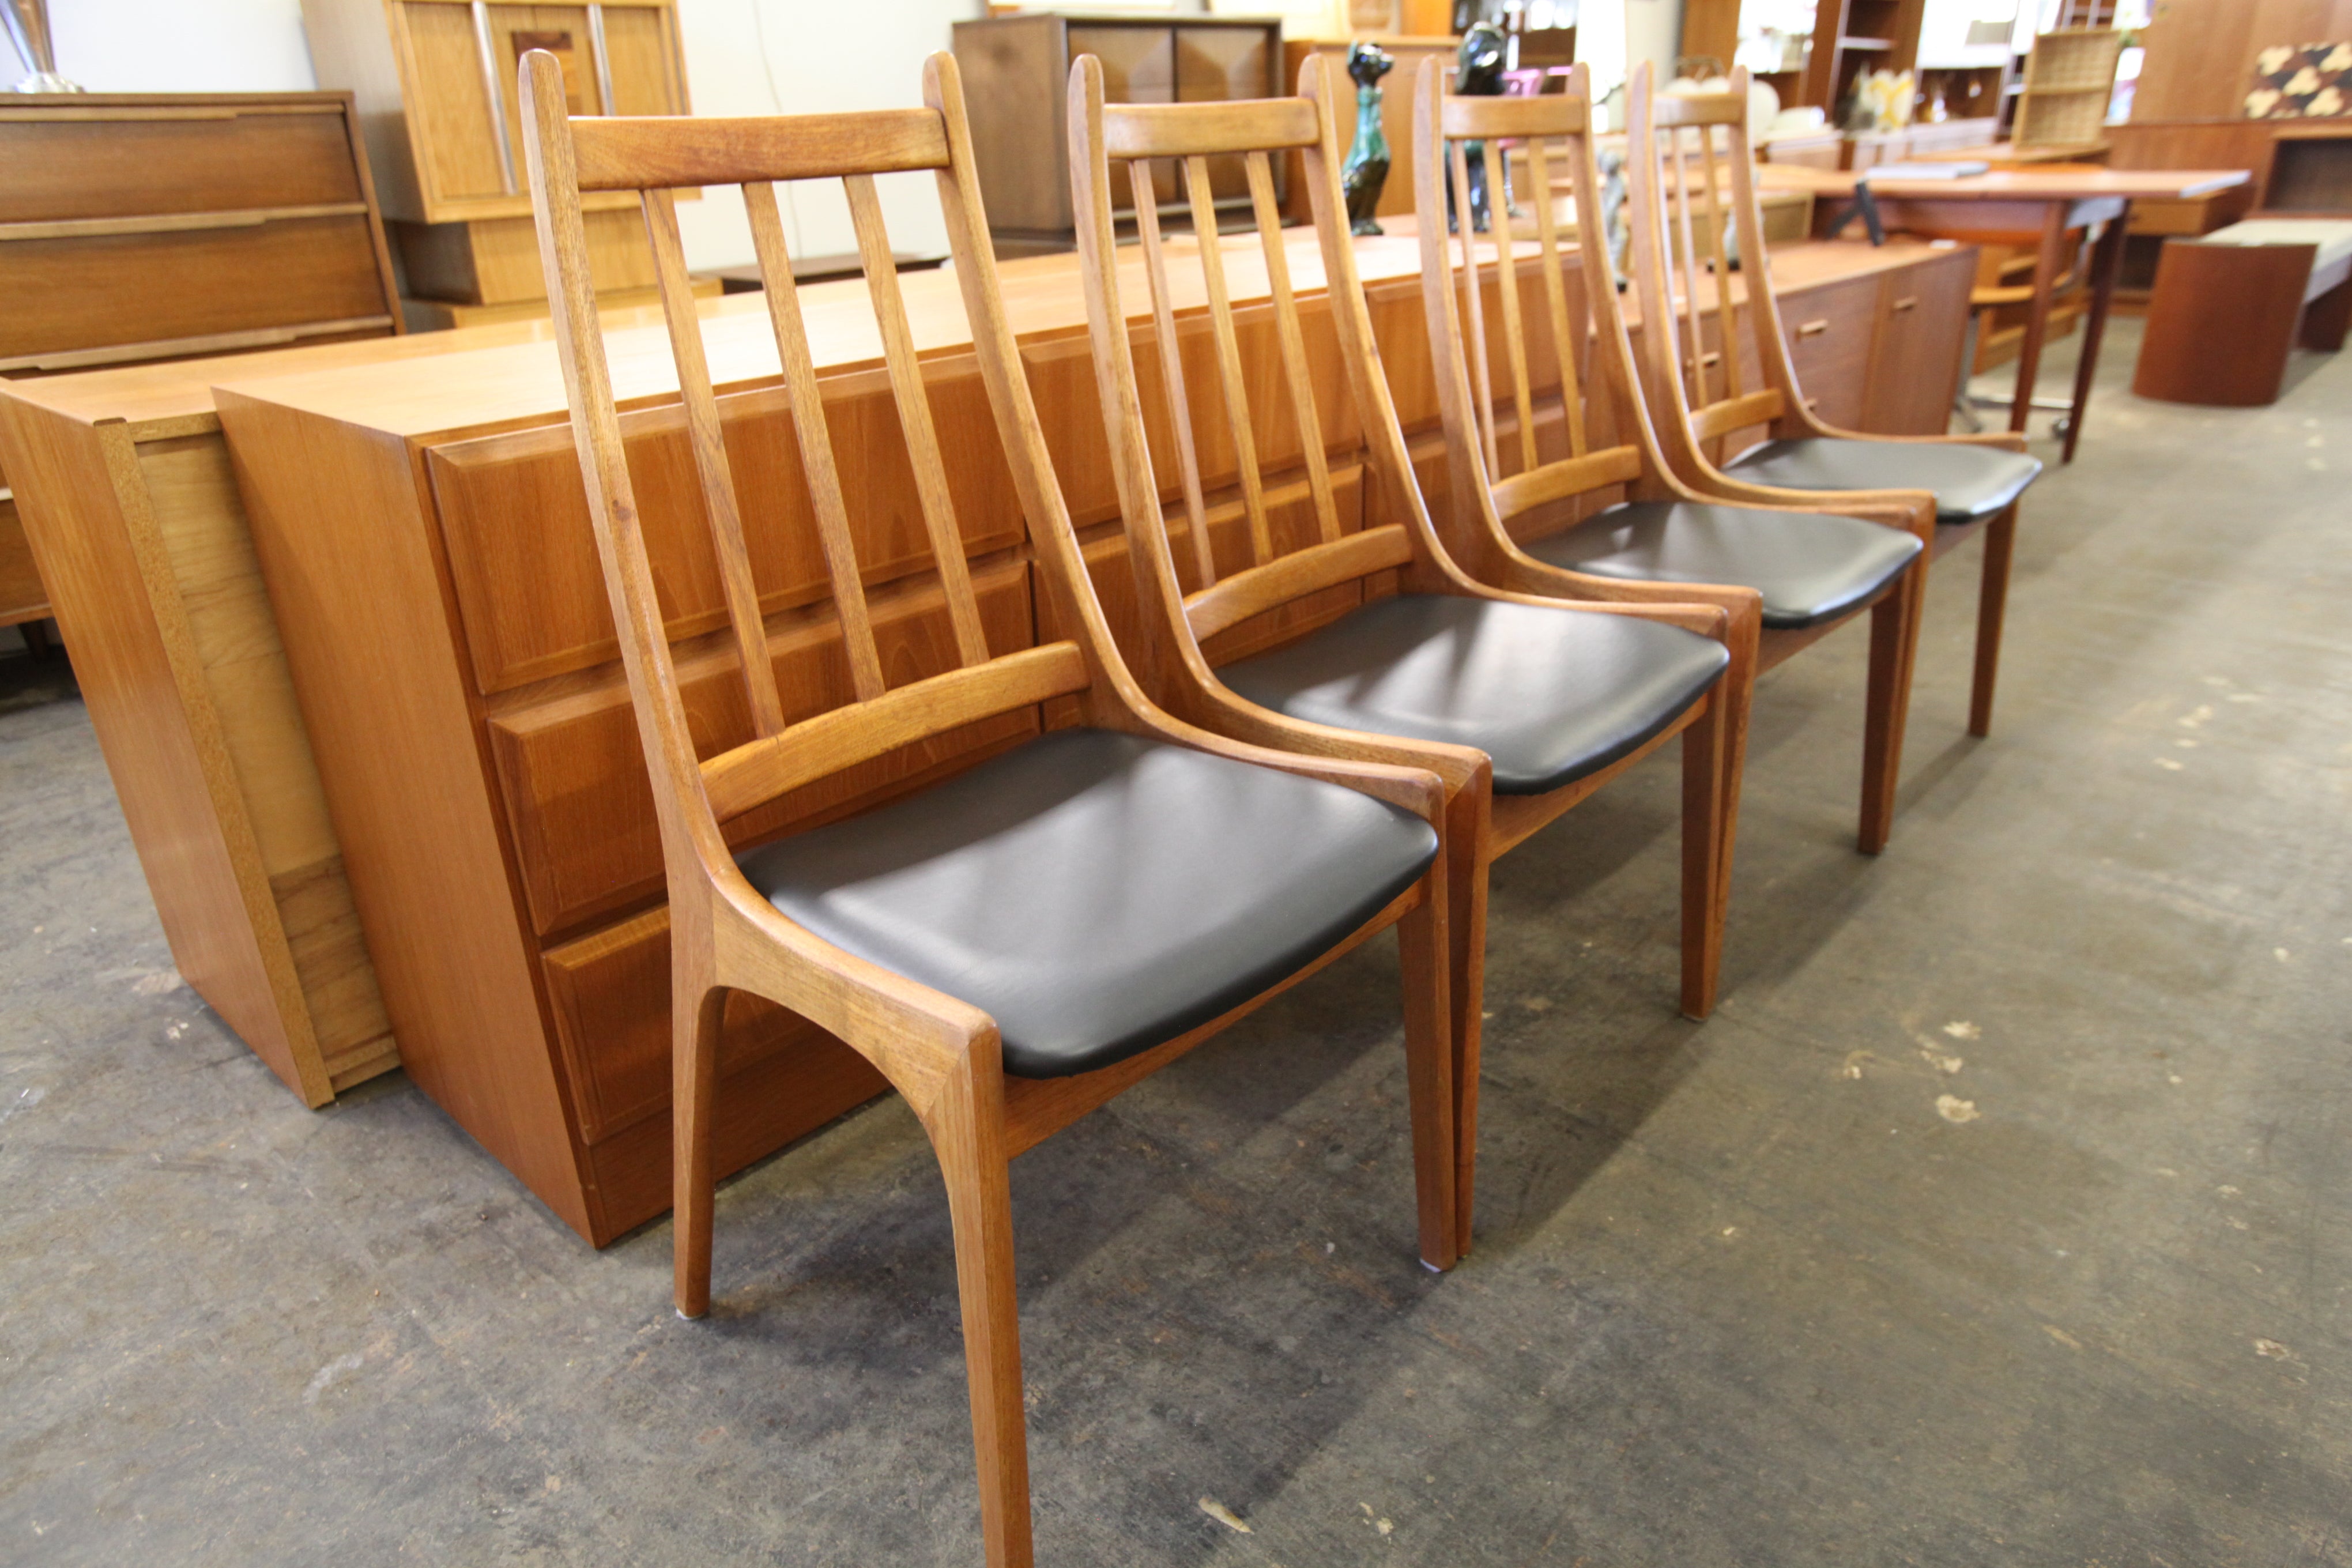 Set of 4 Vintage Teak High Back Dining Chairs (18"W x 20"D x 39.25"H)